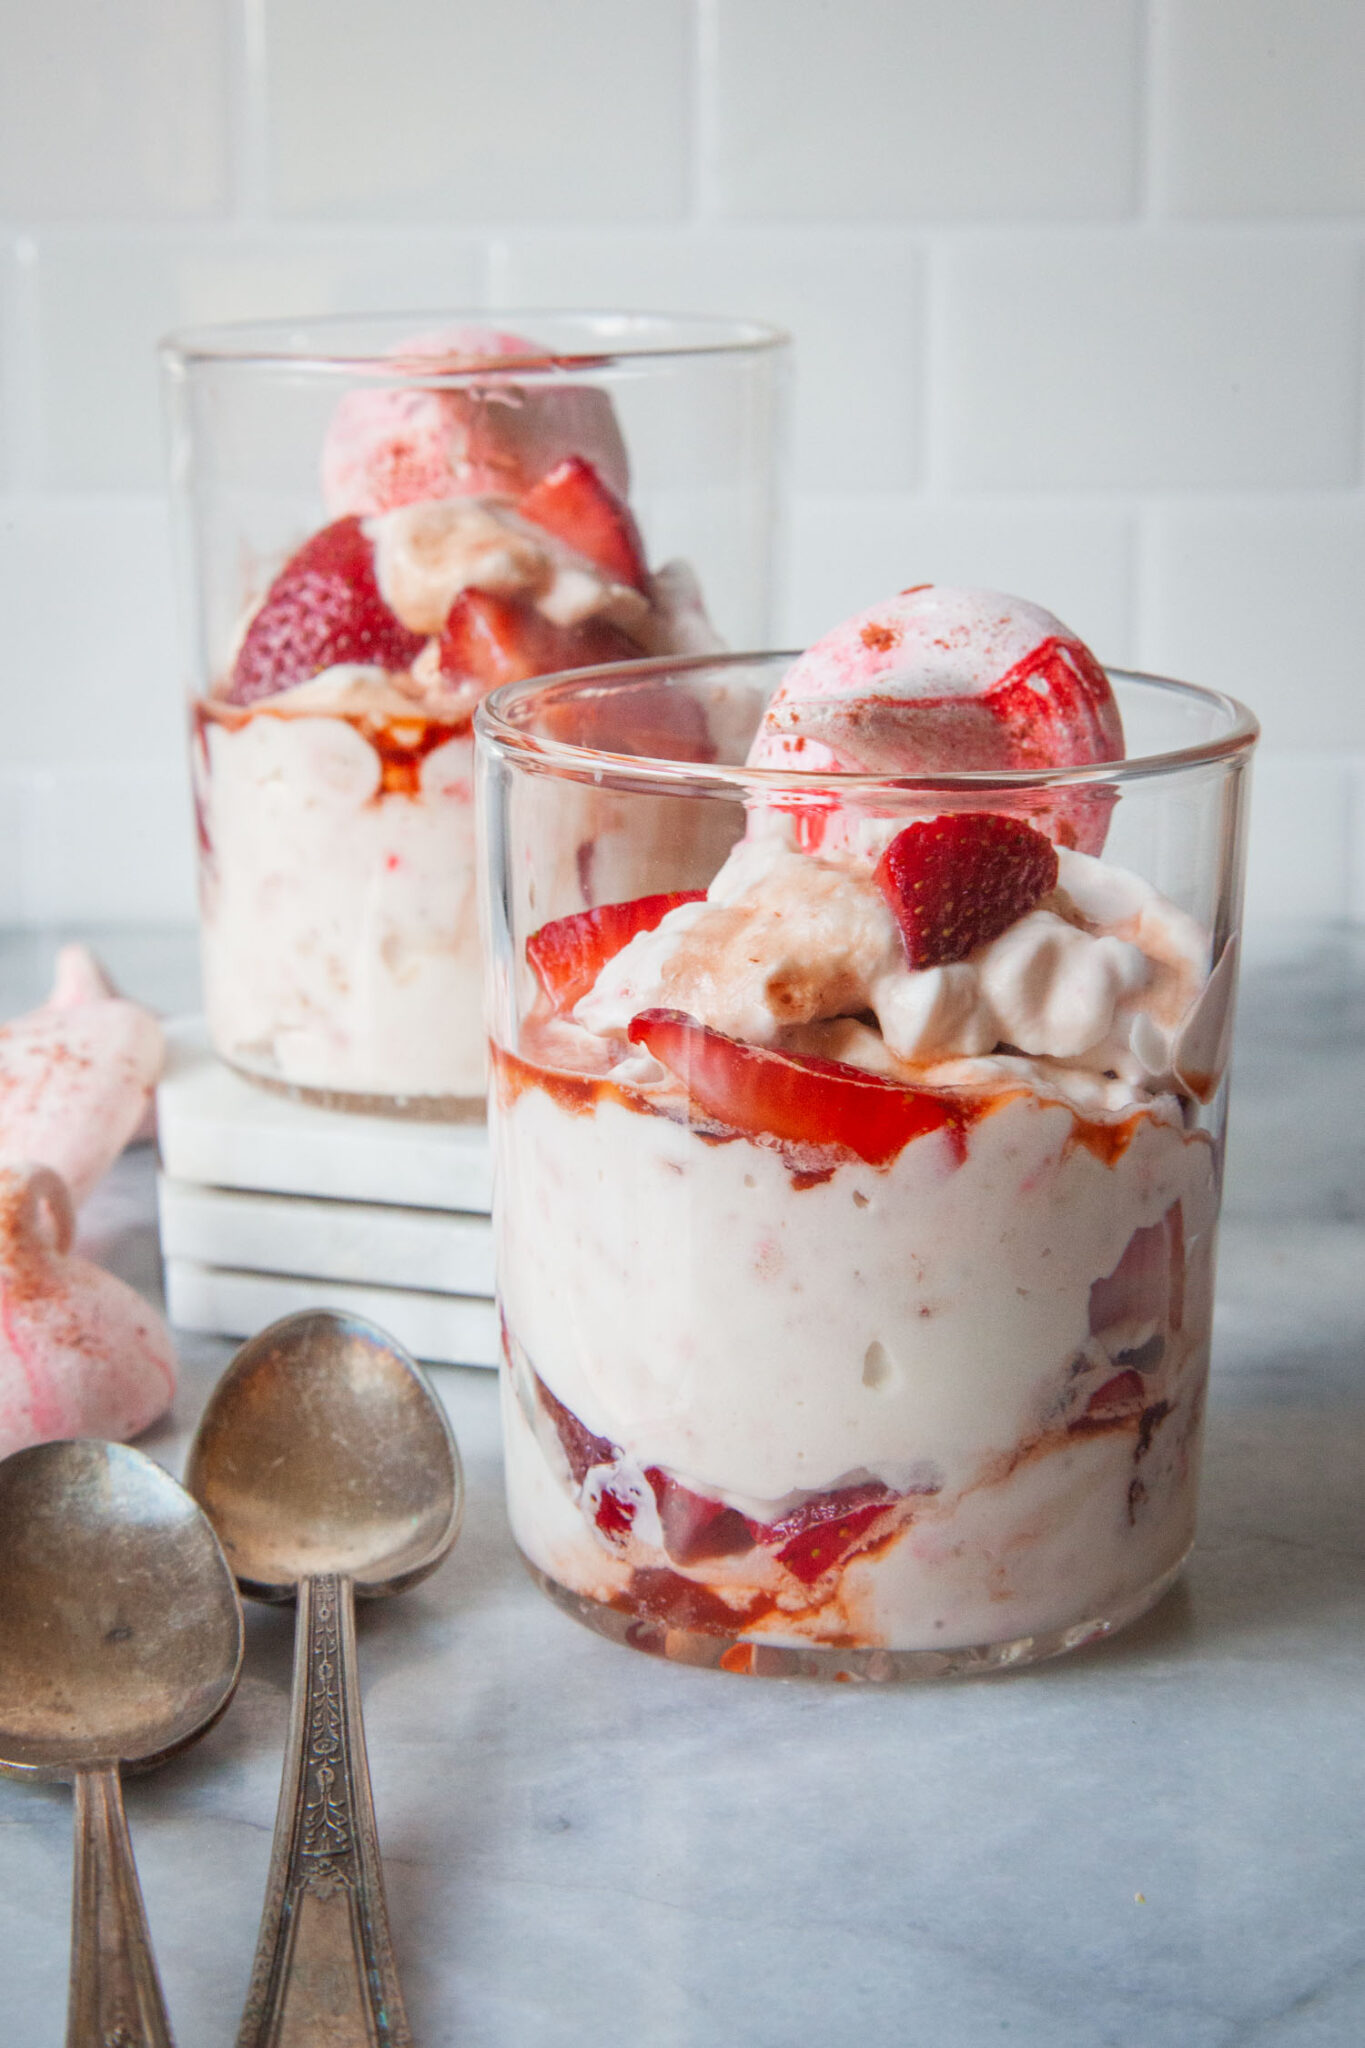 A double old fashion glass filled with British Eton Mess, a strawberry, meringue and whipped cream dessert. There is another glass of Eton Mess behind it on a marble coasters, with a spoons on the table, and a couple of meringue cookies sitting near by.